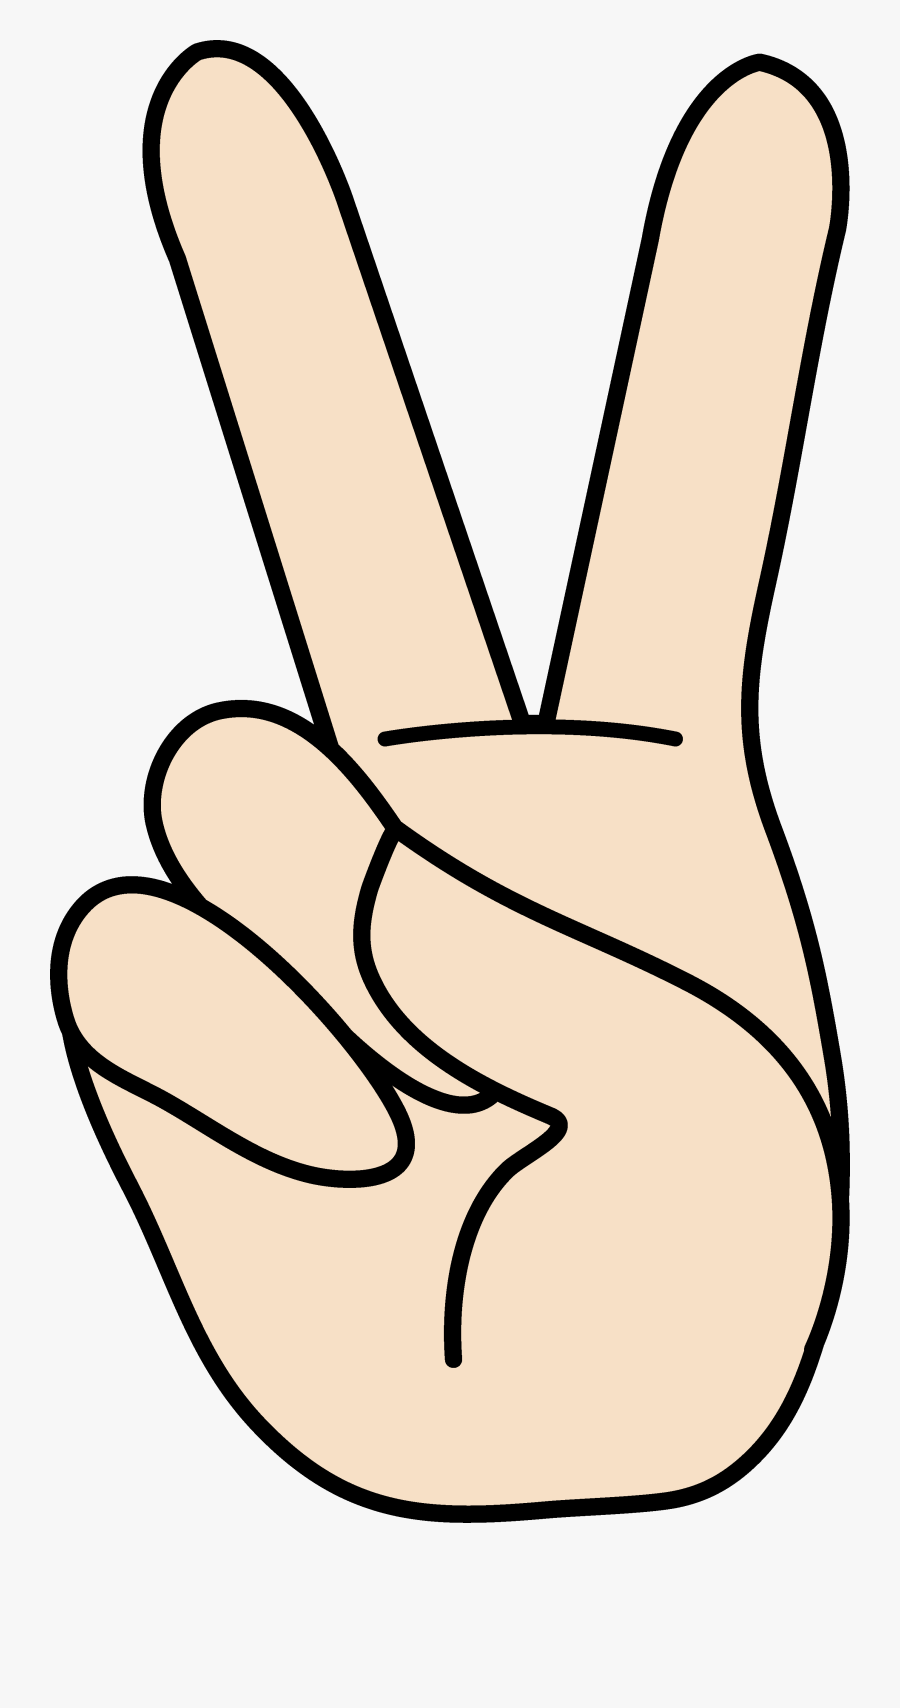 Peace Hand Sign Png, Transparent Clipart